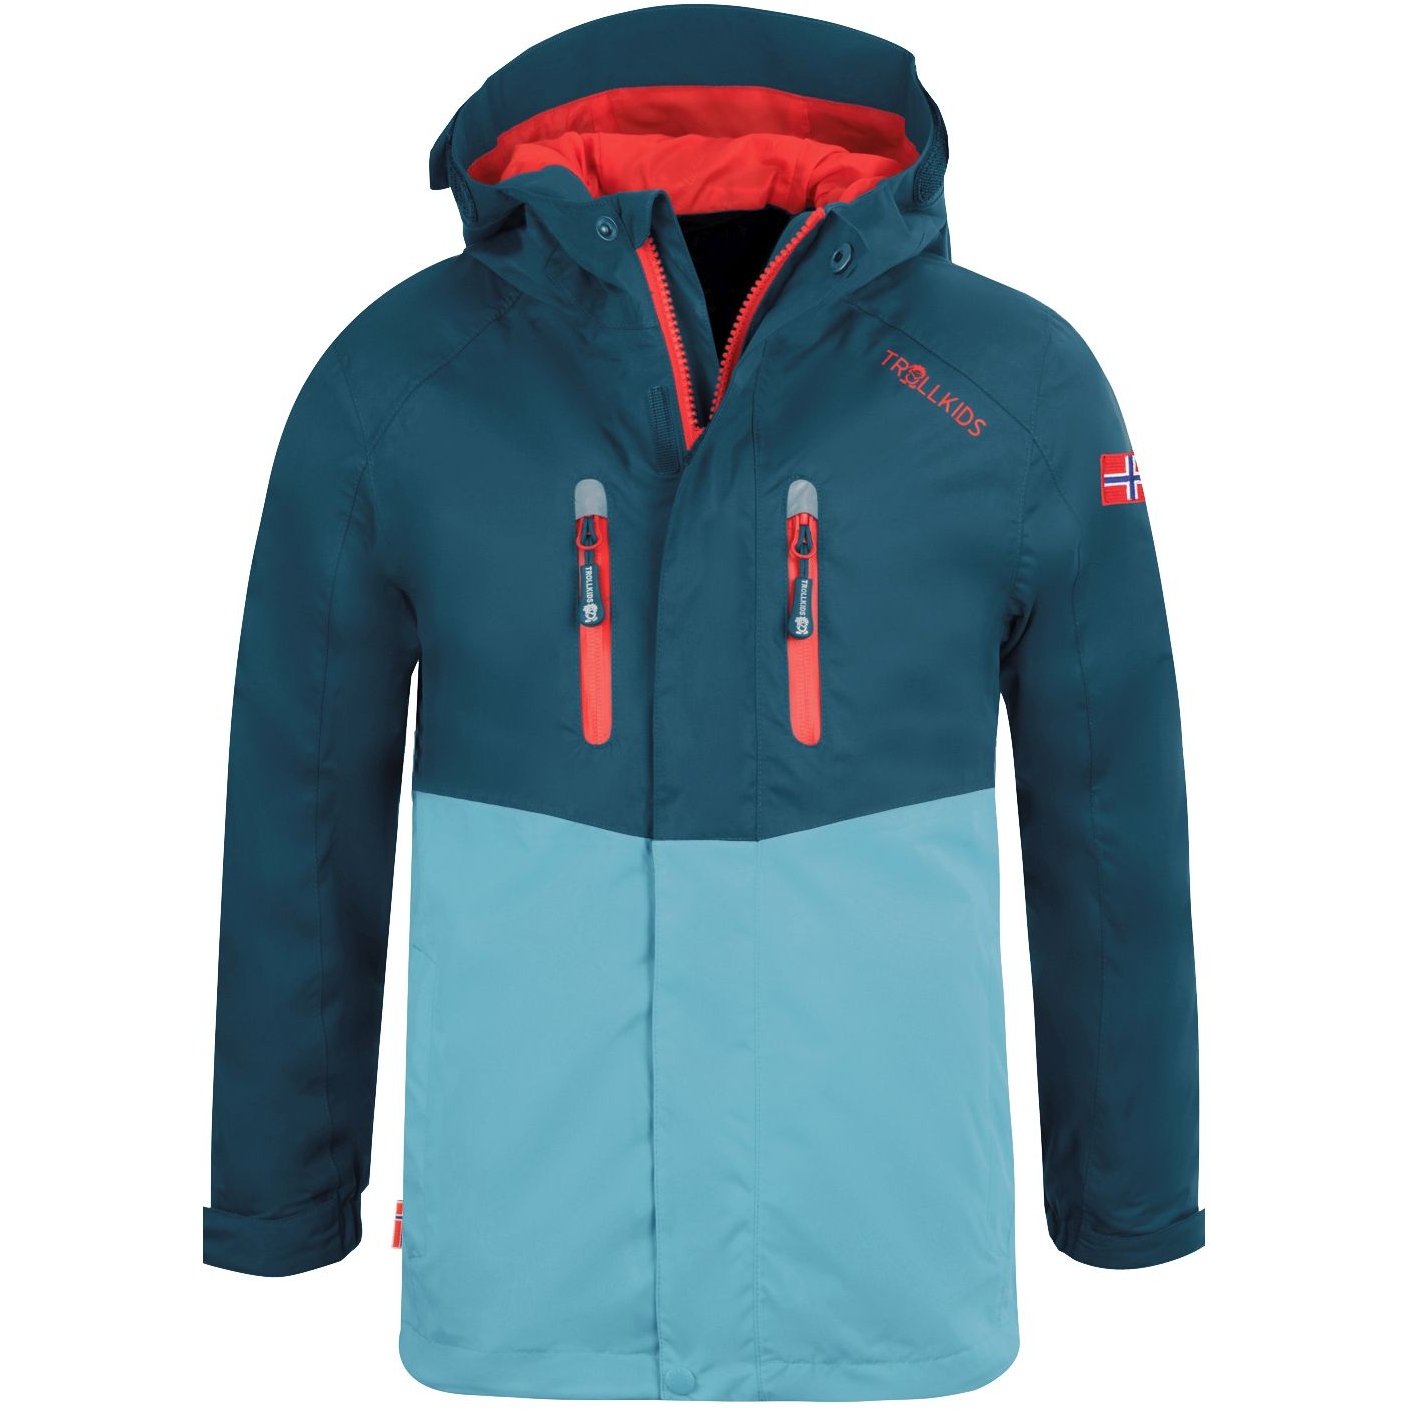 Picture of Trollkids Nusfjord Jacket Kids - Petrol/Dolphin Blue/Spicy Red